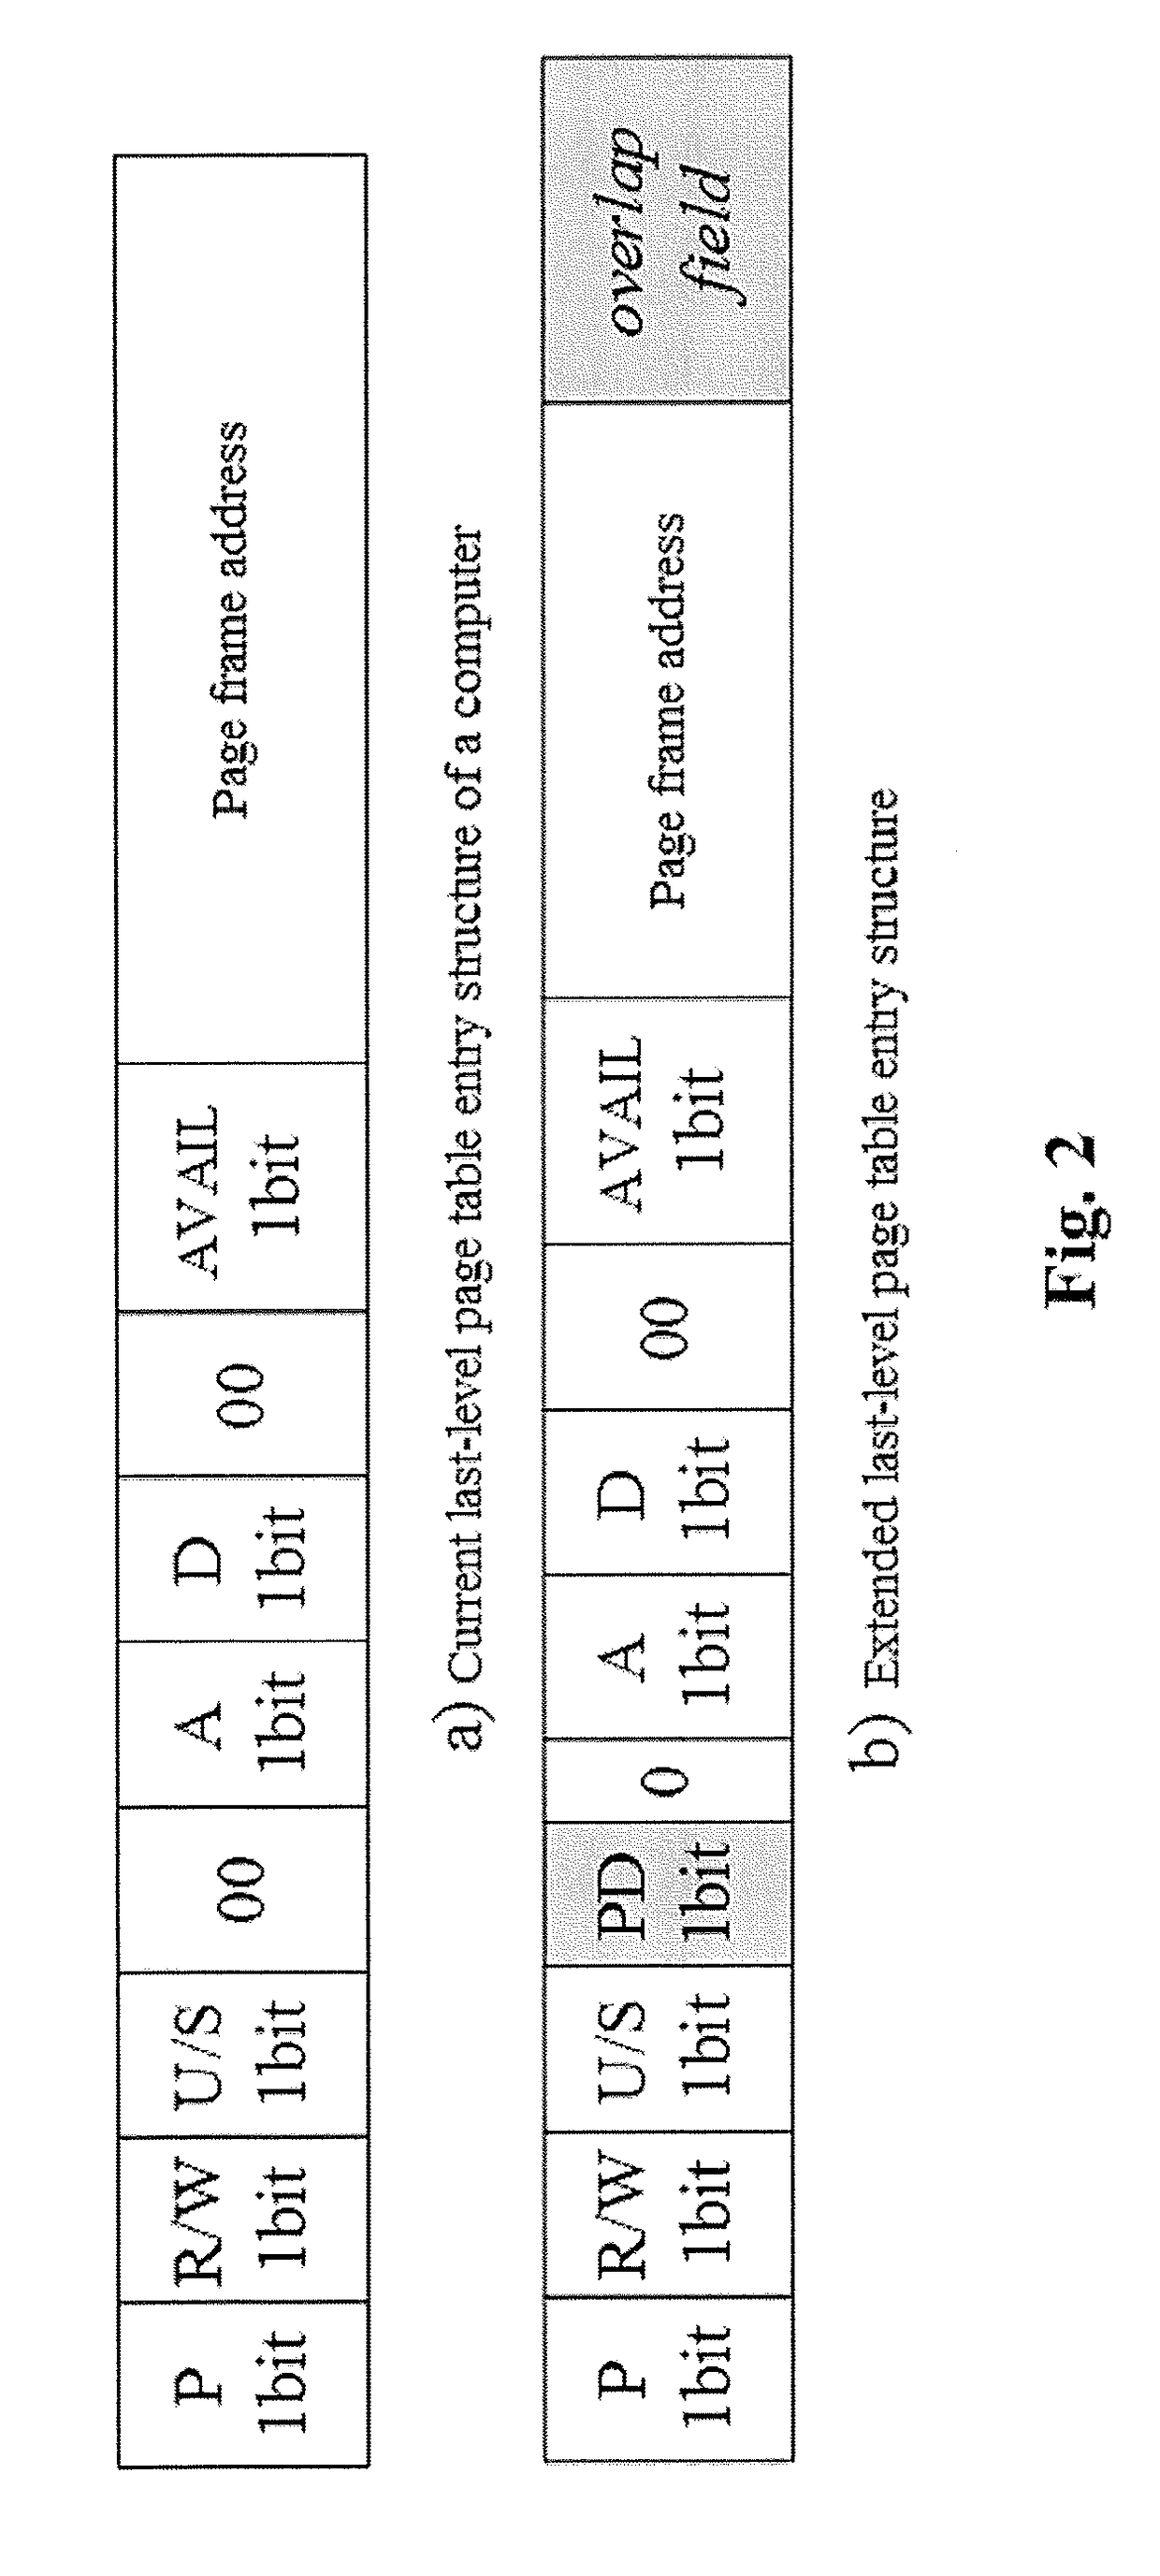 Dram/nvm hierarchical heterogeneous memory access method and system with software-hardware cooperative management